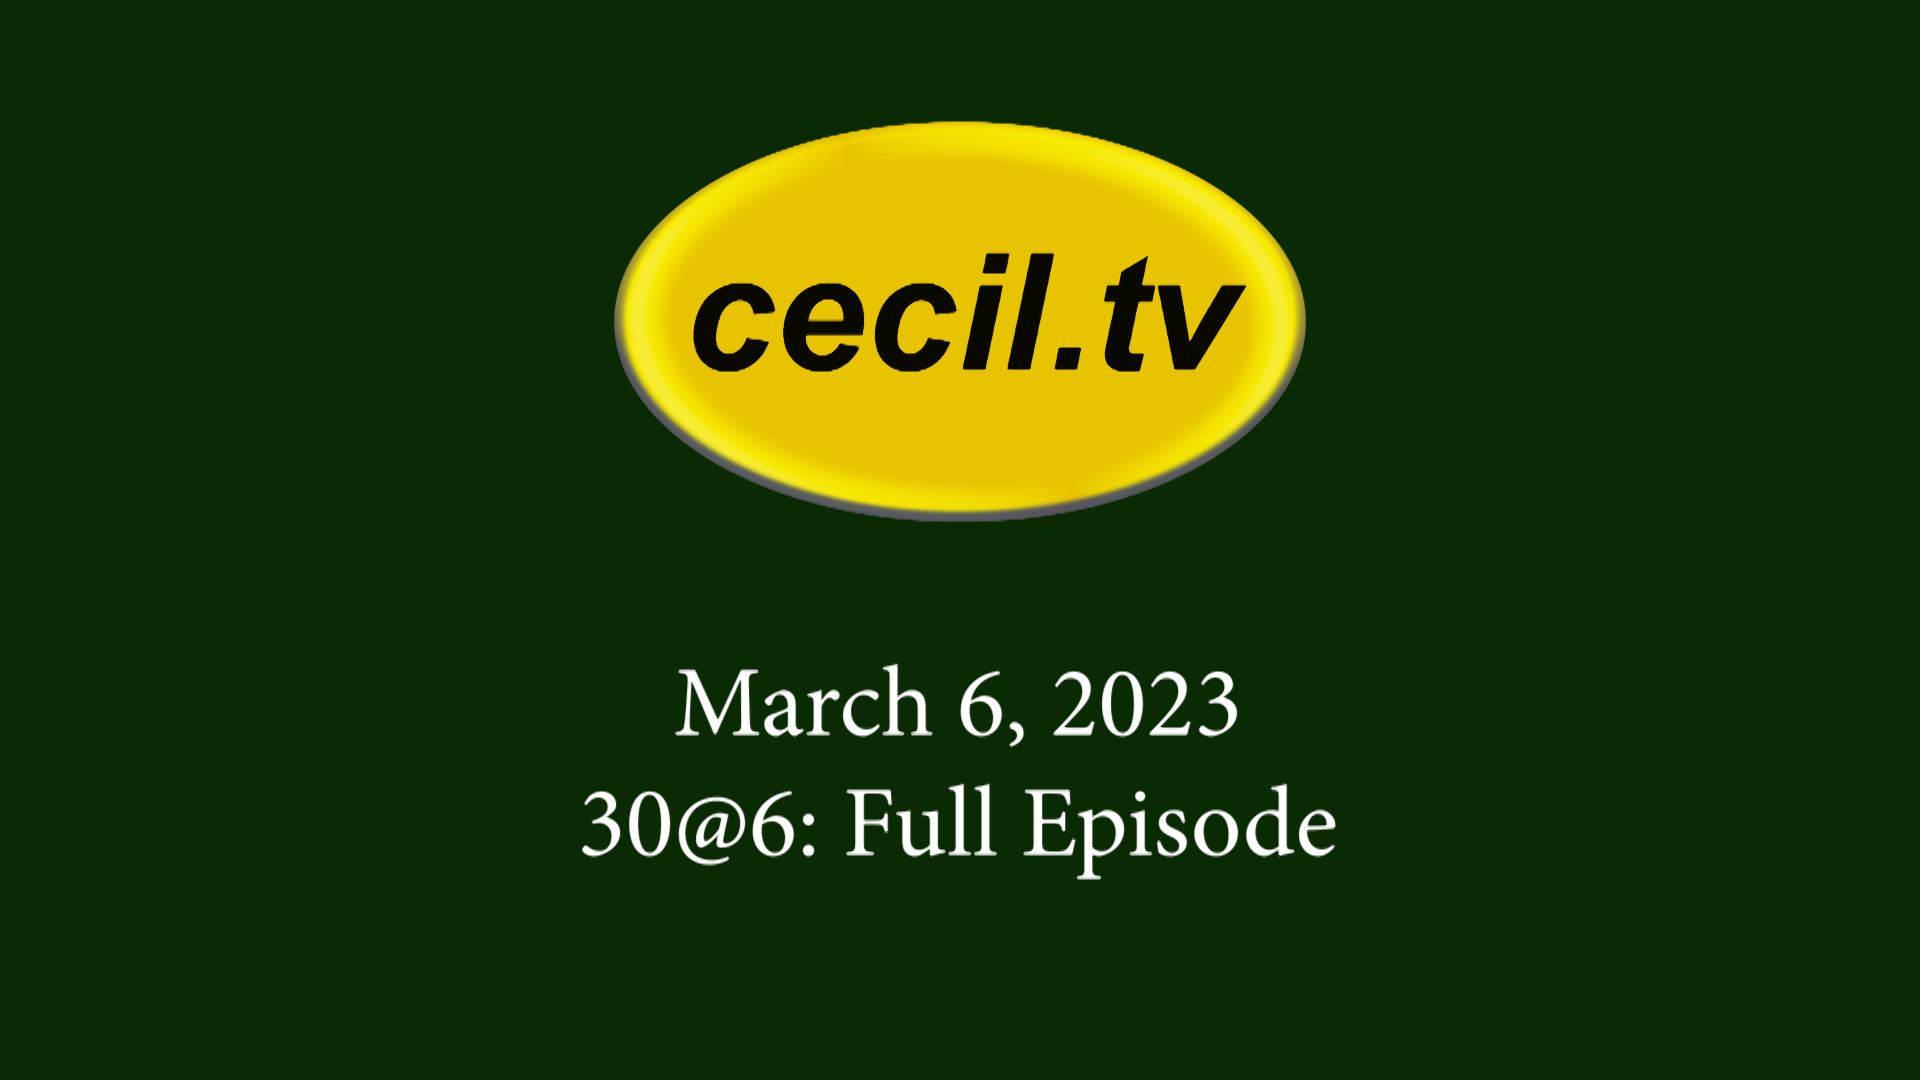 March 6, 2023, 30@6: Full Episode